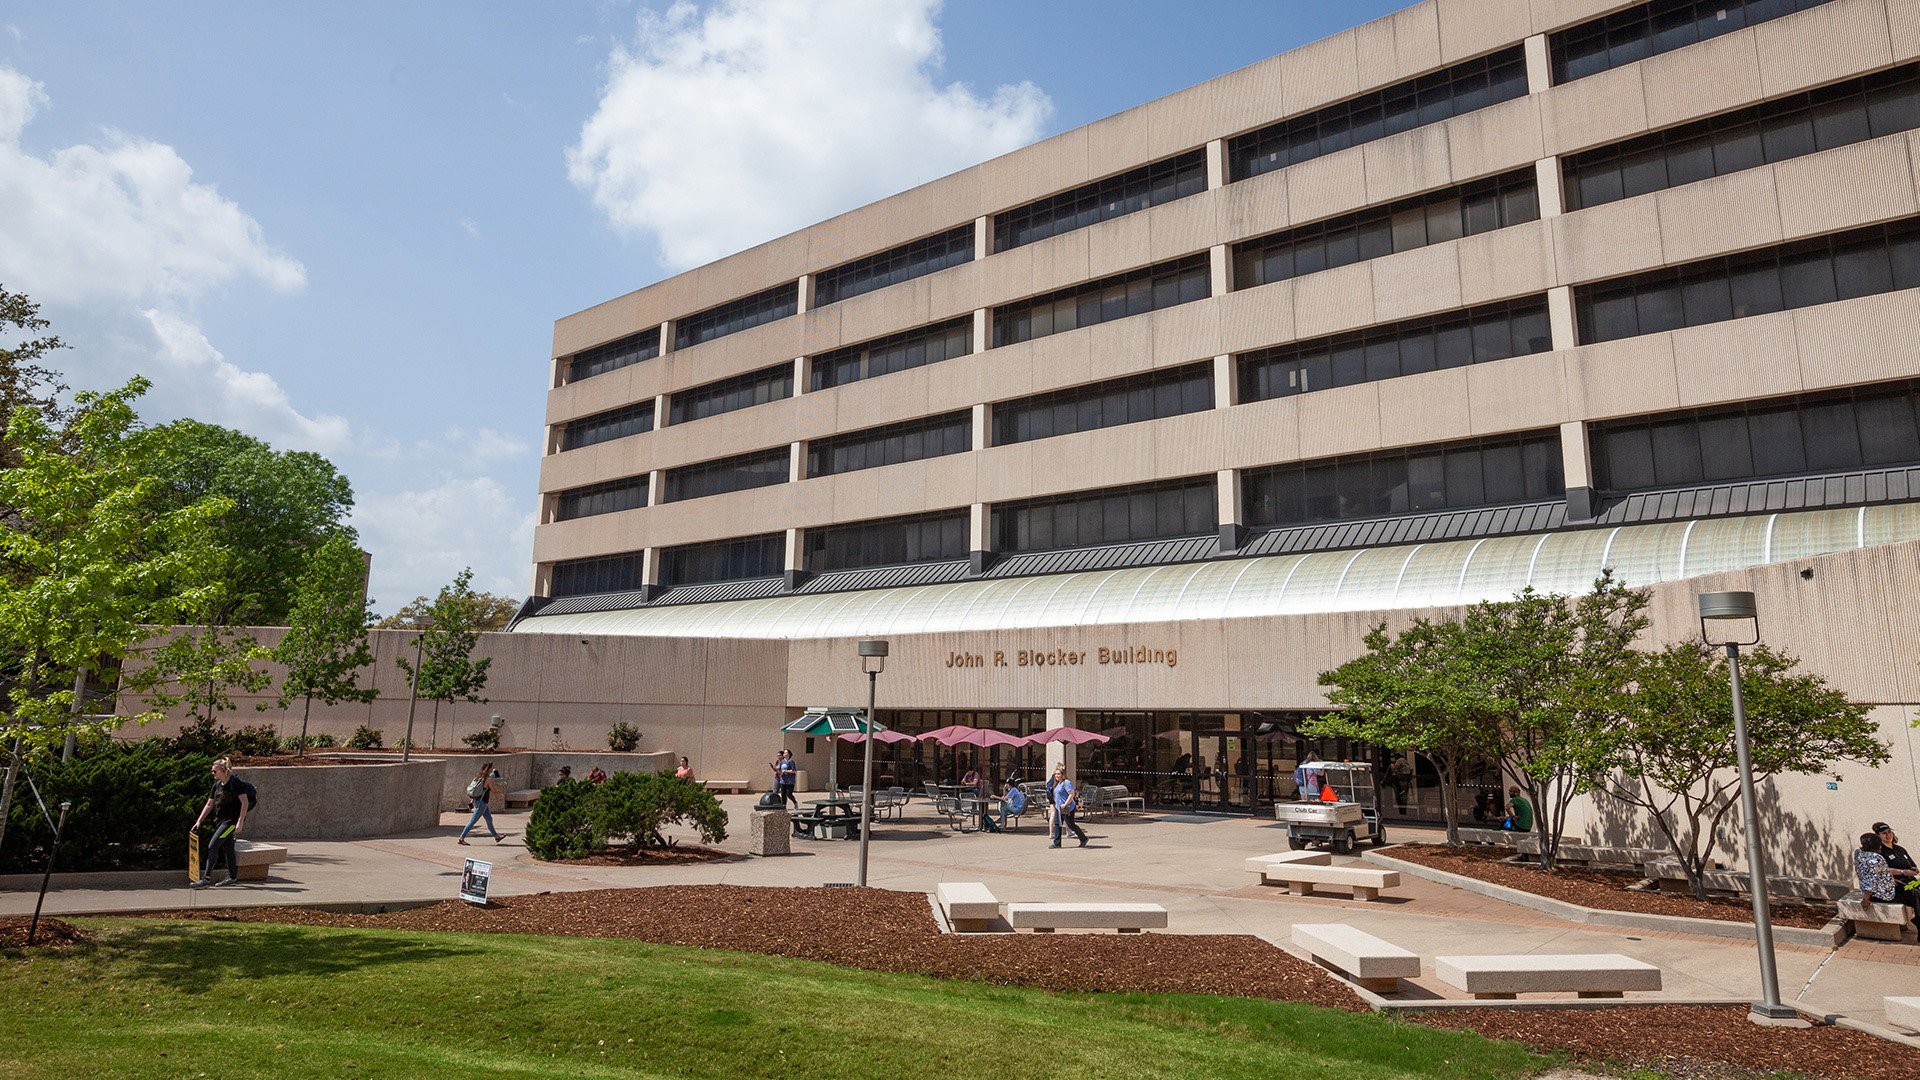 Front entrance of the John R. Blocker Building on the Texas A&M University campus